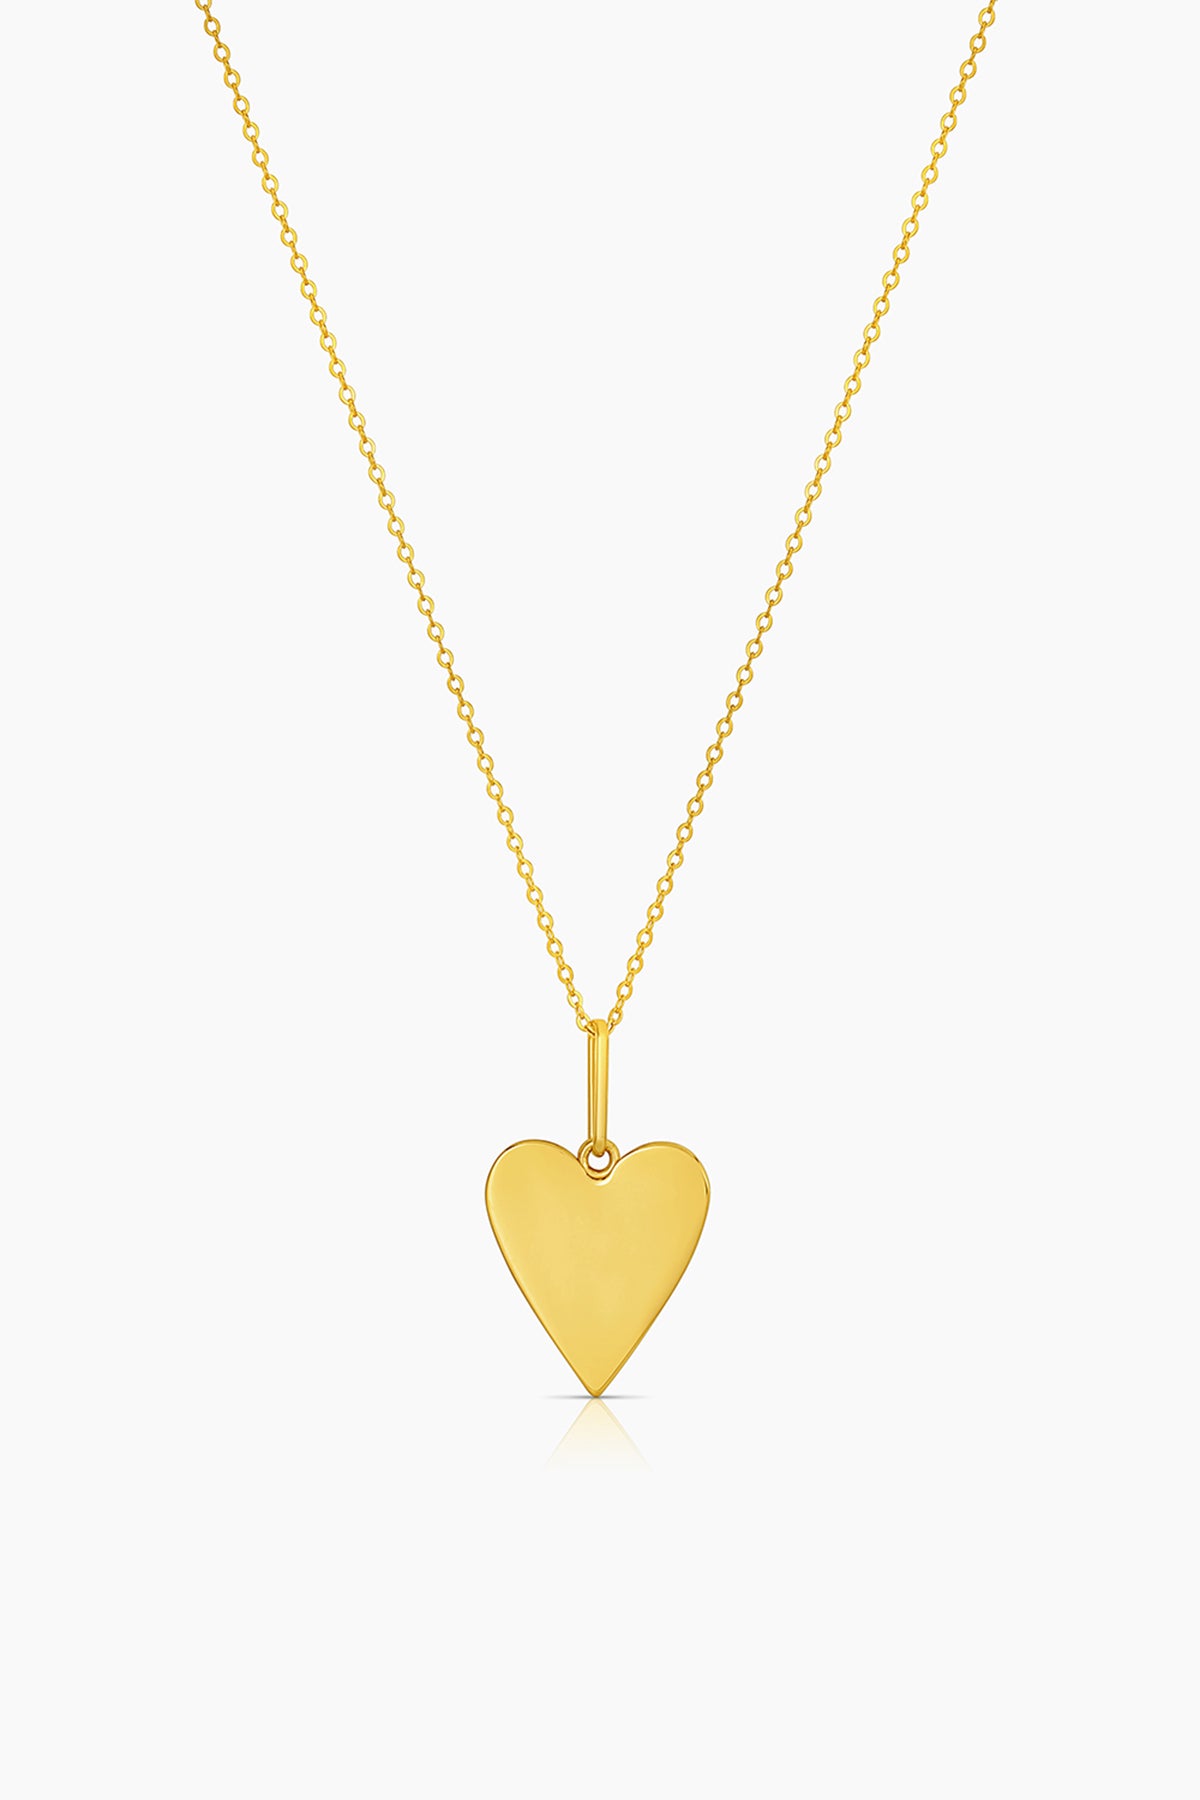 A small AMAYA HEART NECKLACE BY THATCH pendant on a chain.-35526305087681